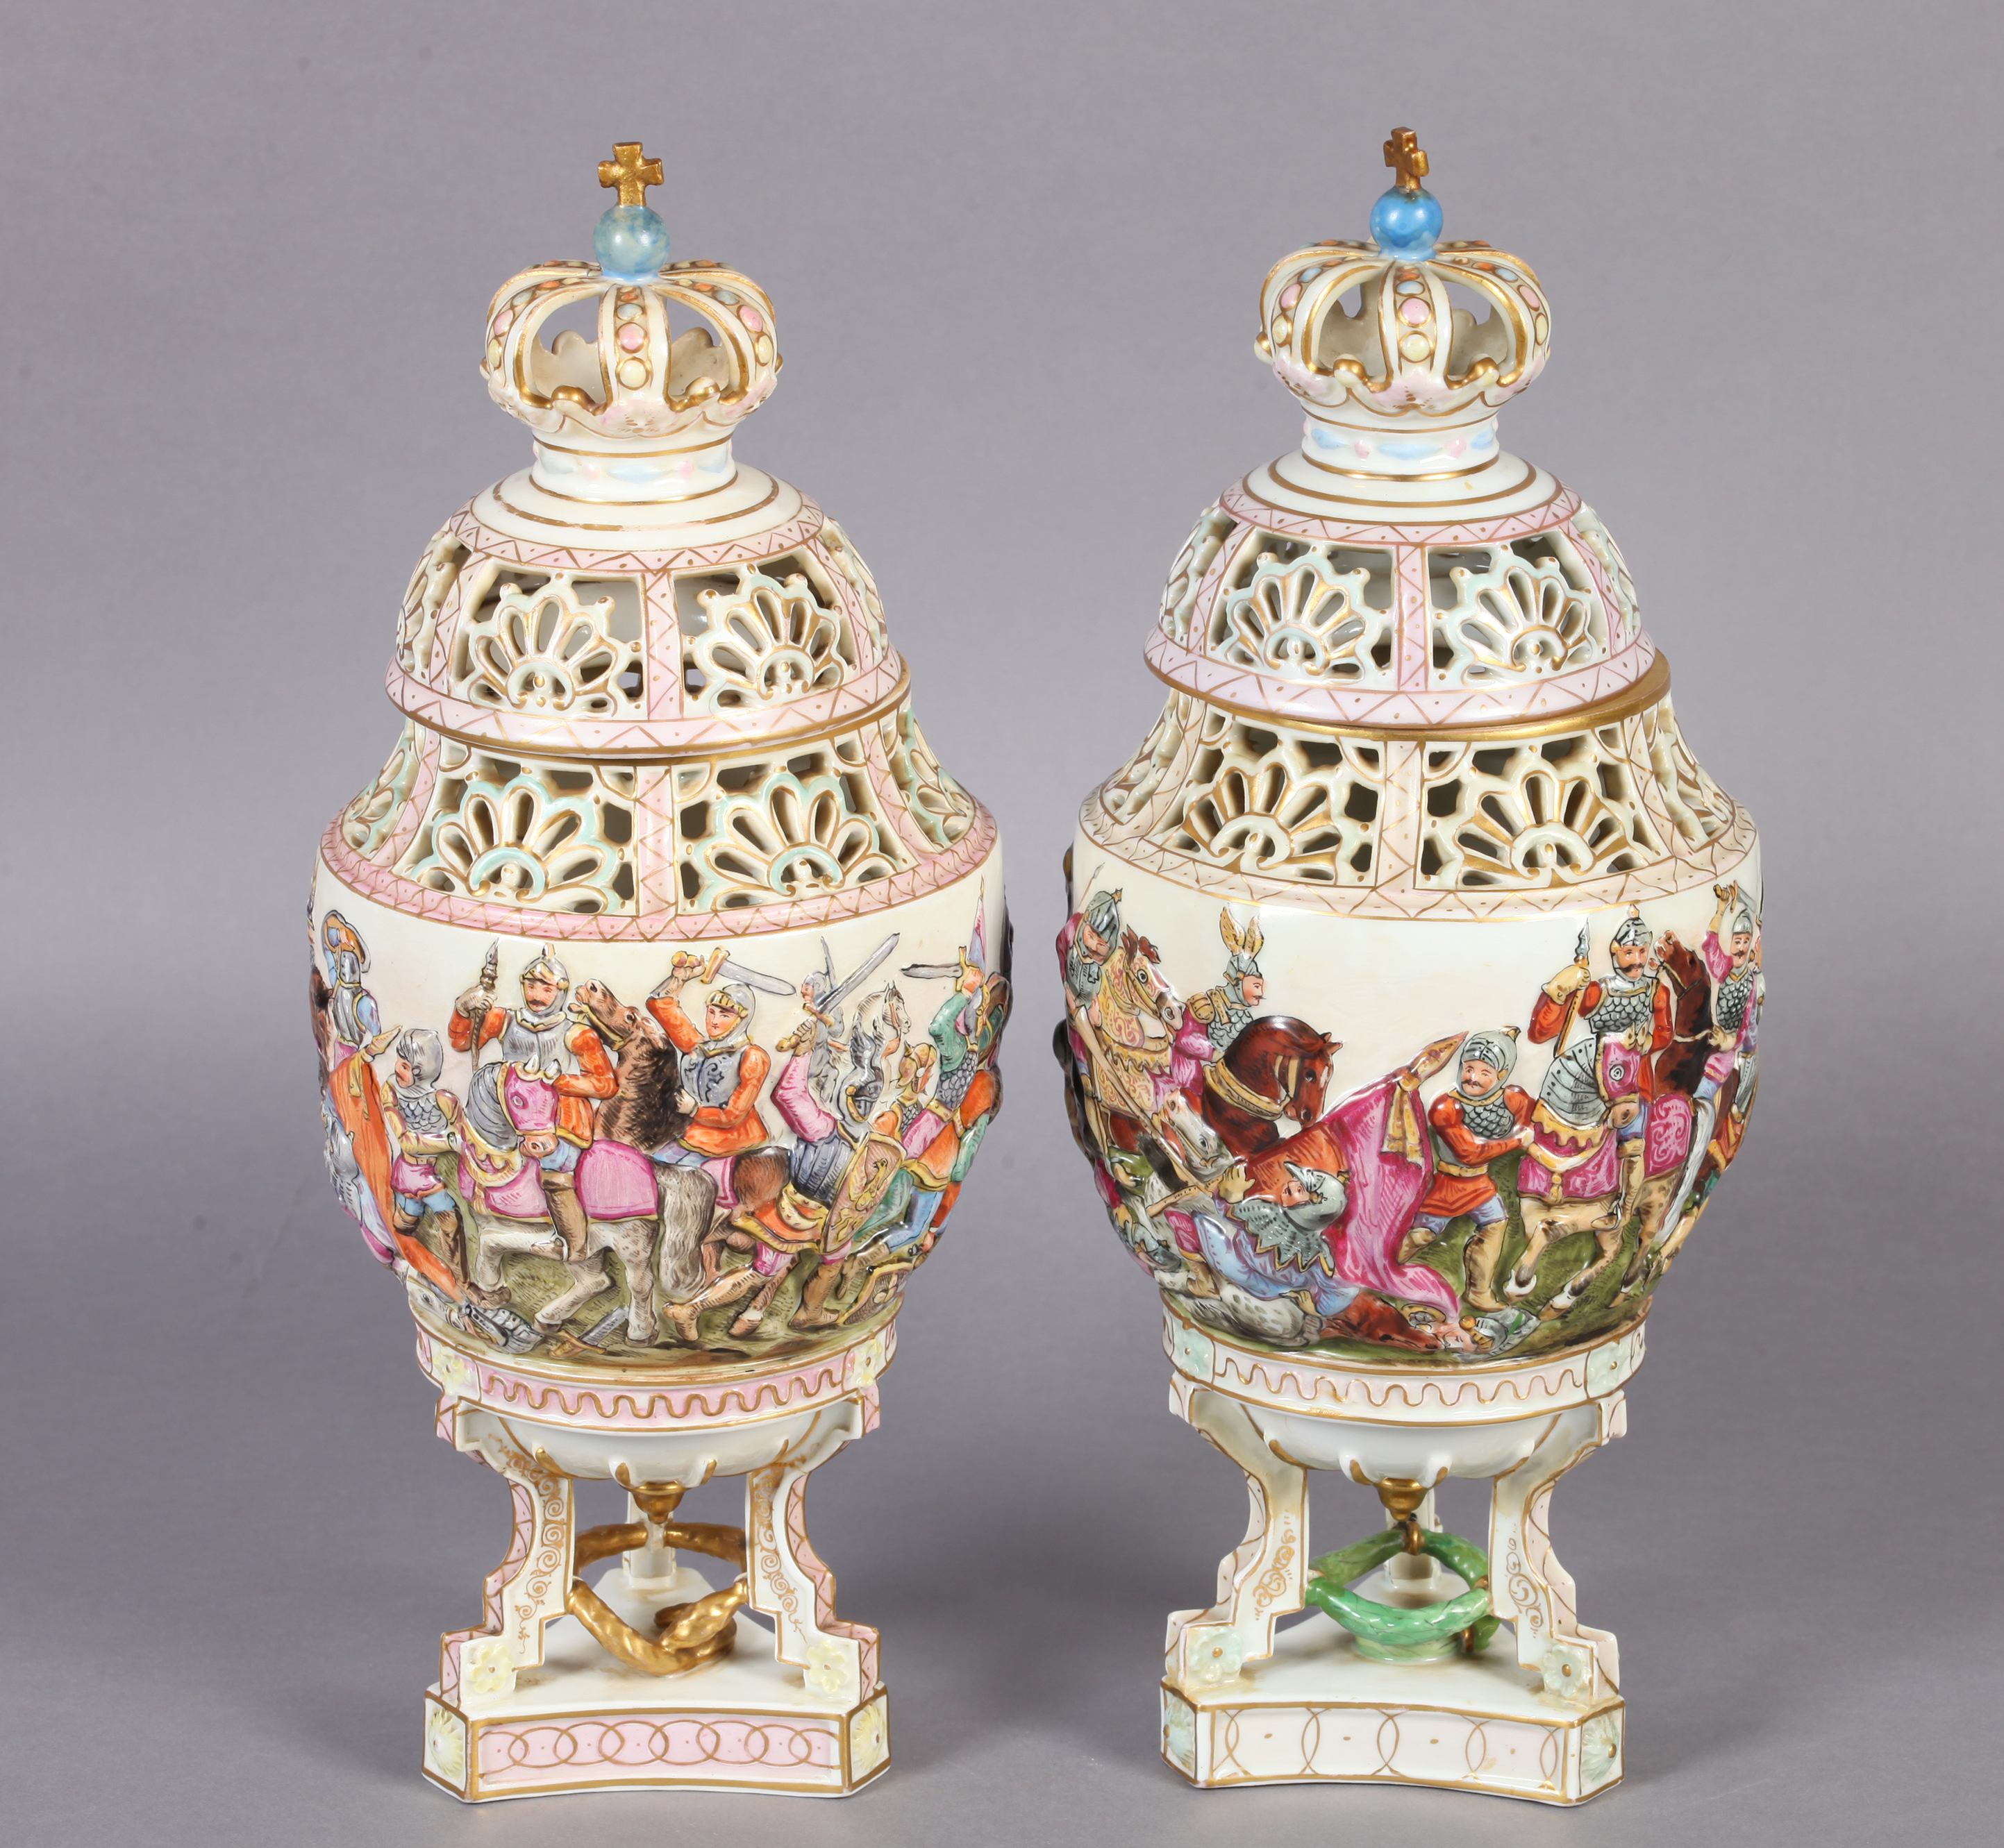 A PAIR OF LATE 19TH CENTURY NAPLES DOCCIA VASES AND COVERS of urn form, relief moulded with battle